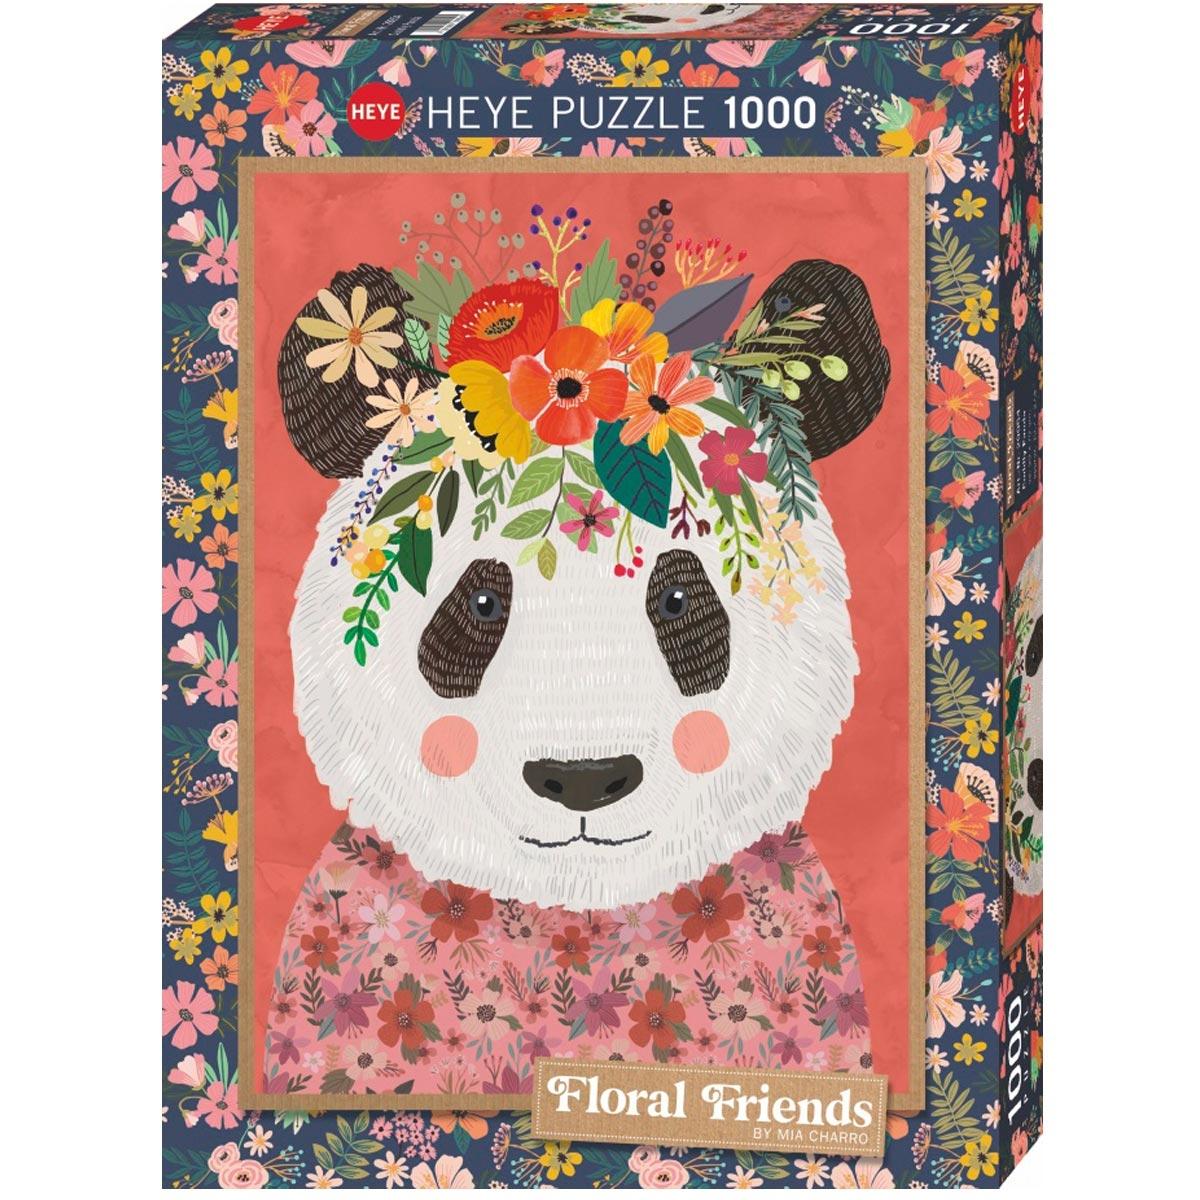 Selected image for HEYE  Puzzle 1000 delova Floral Friends Cuddly Panda 29954